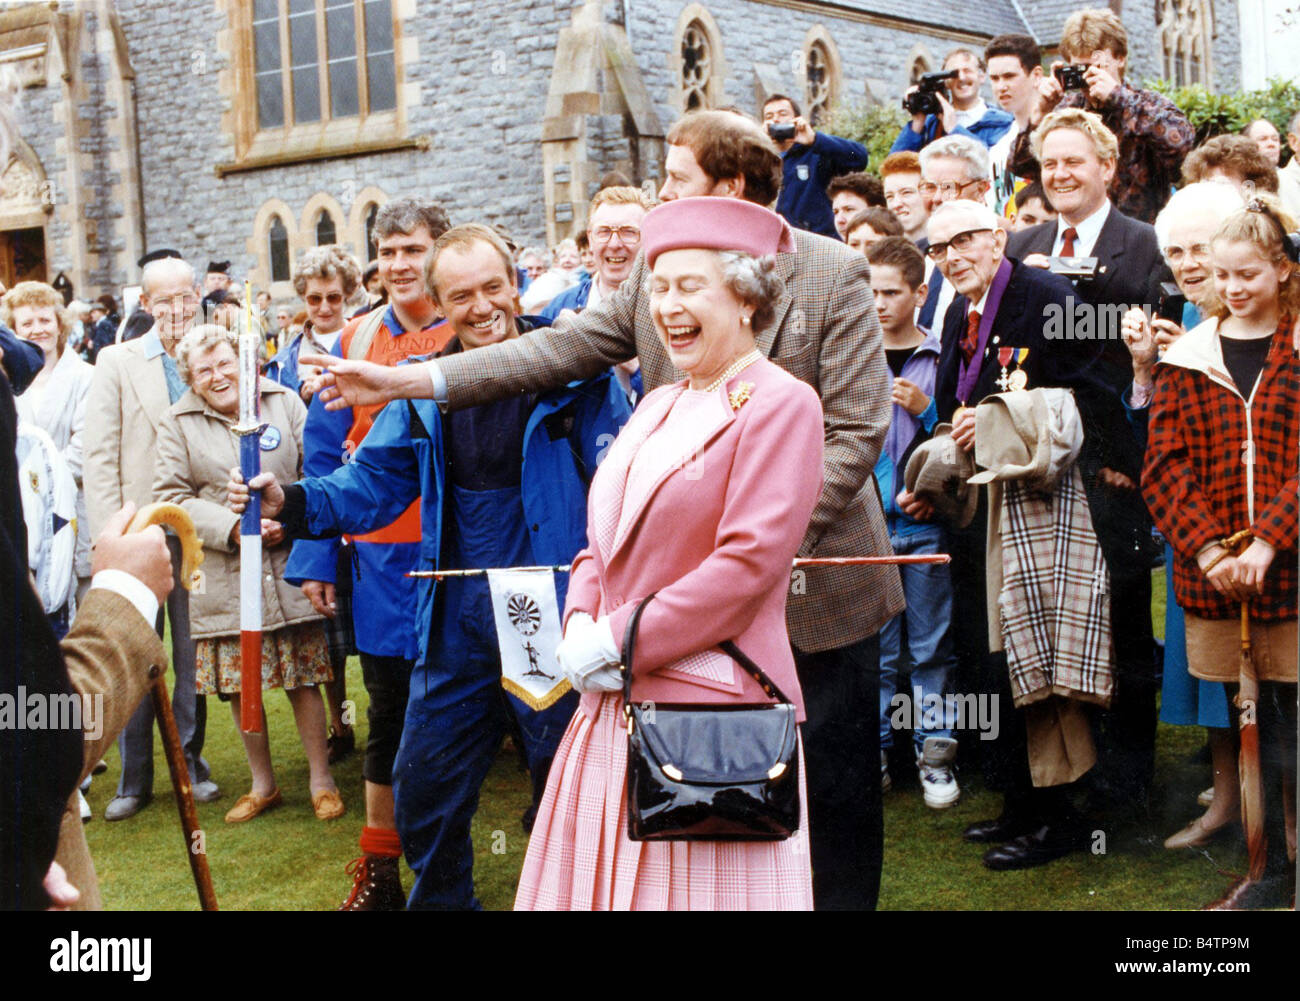 queen-elizabeth-ii-at-fort-william-august-1991-laughing-at-dj-jimmy-B4TP9M.jpg